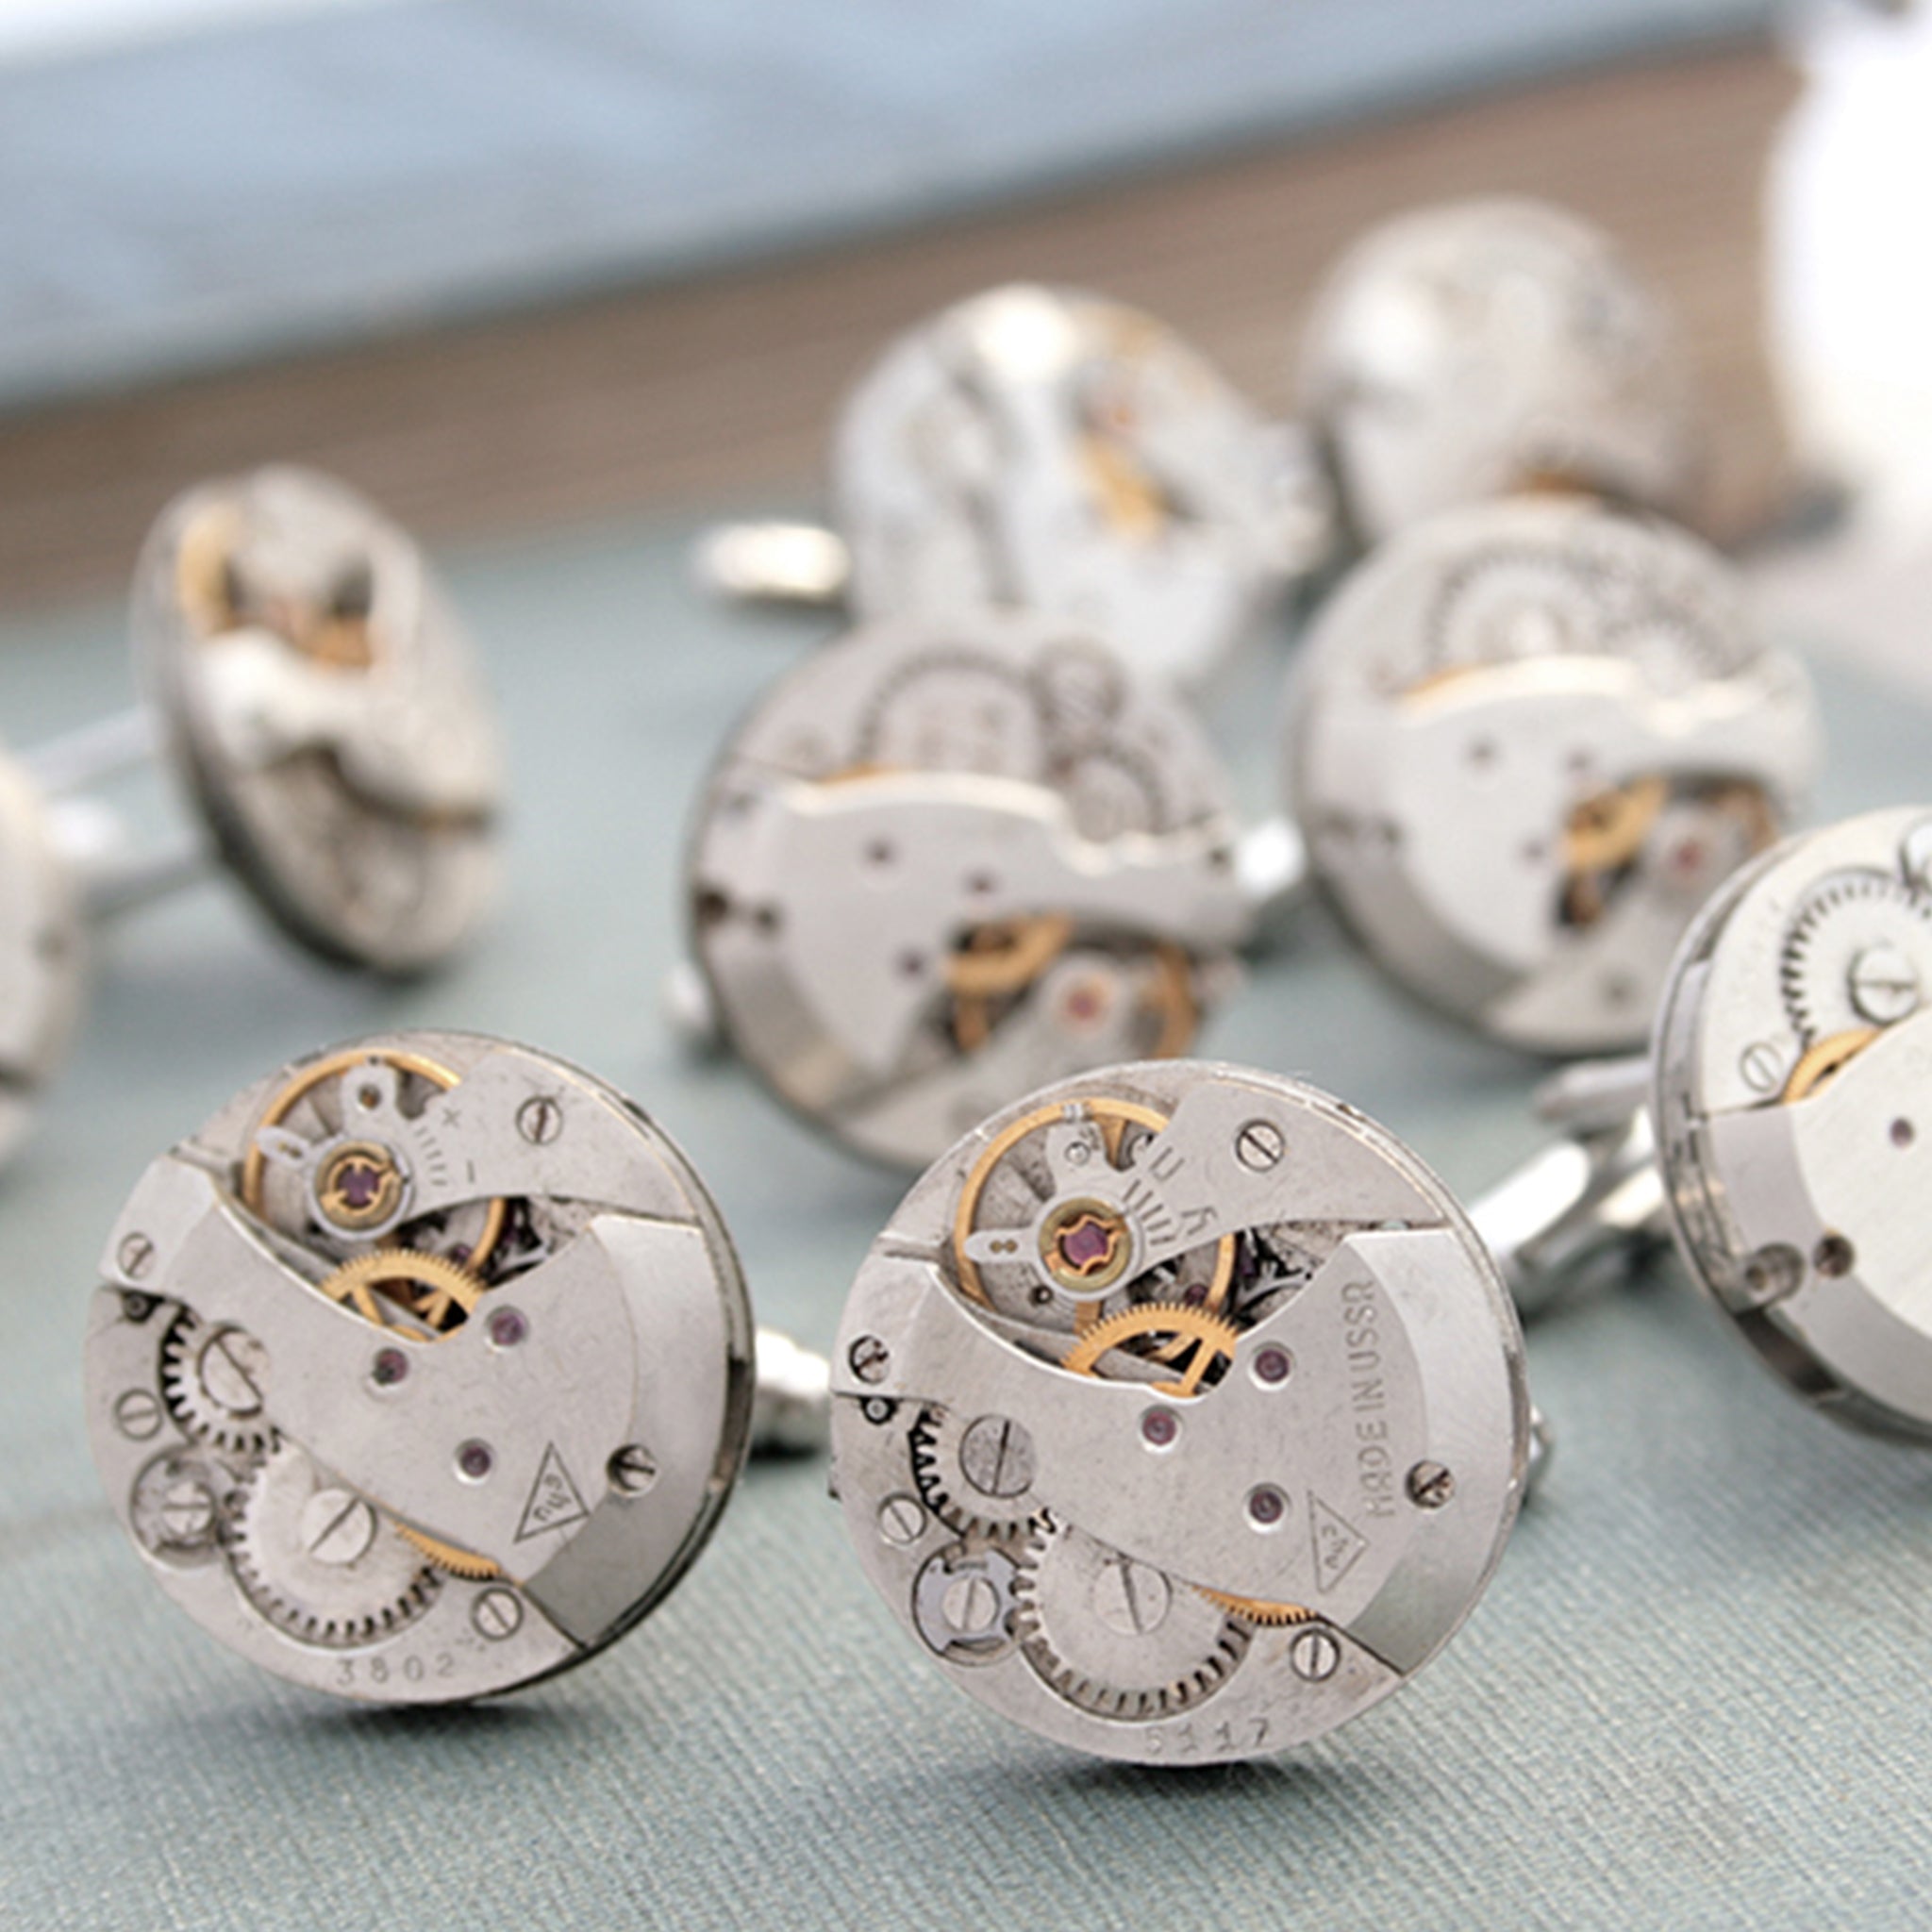 Many sets of Novelty Watch Cufflinks made of real watches